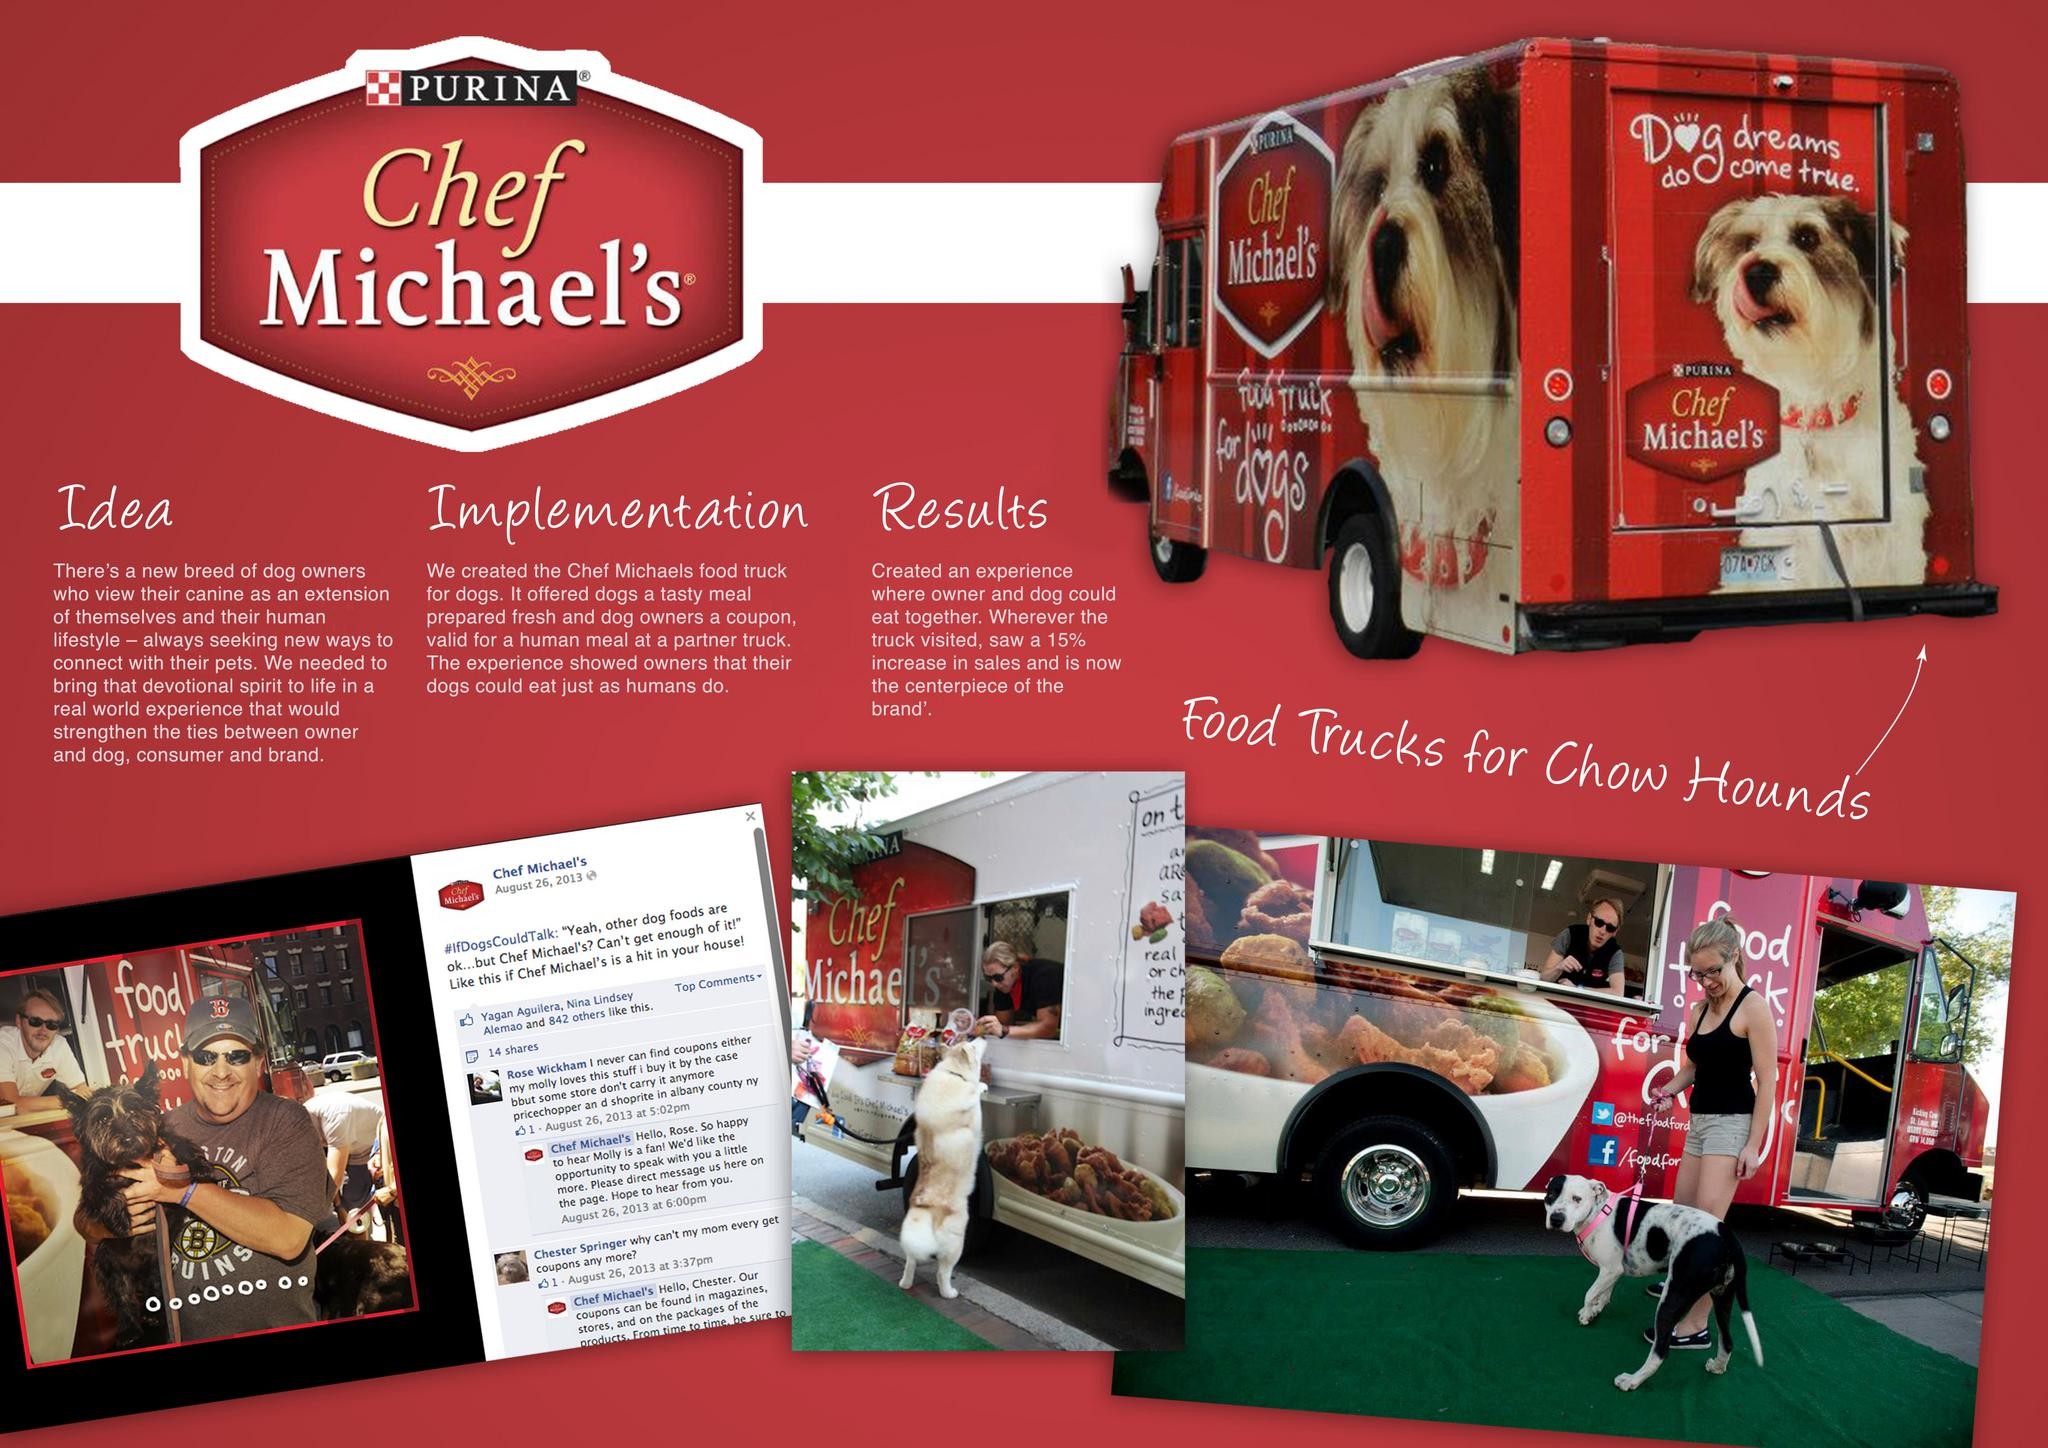 FOOD TRUCKS FOR CHOW HOUNDS